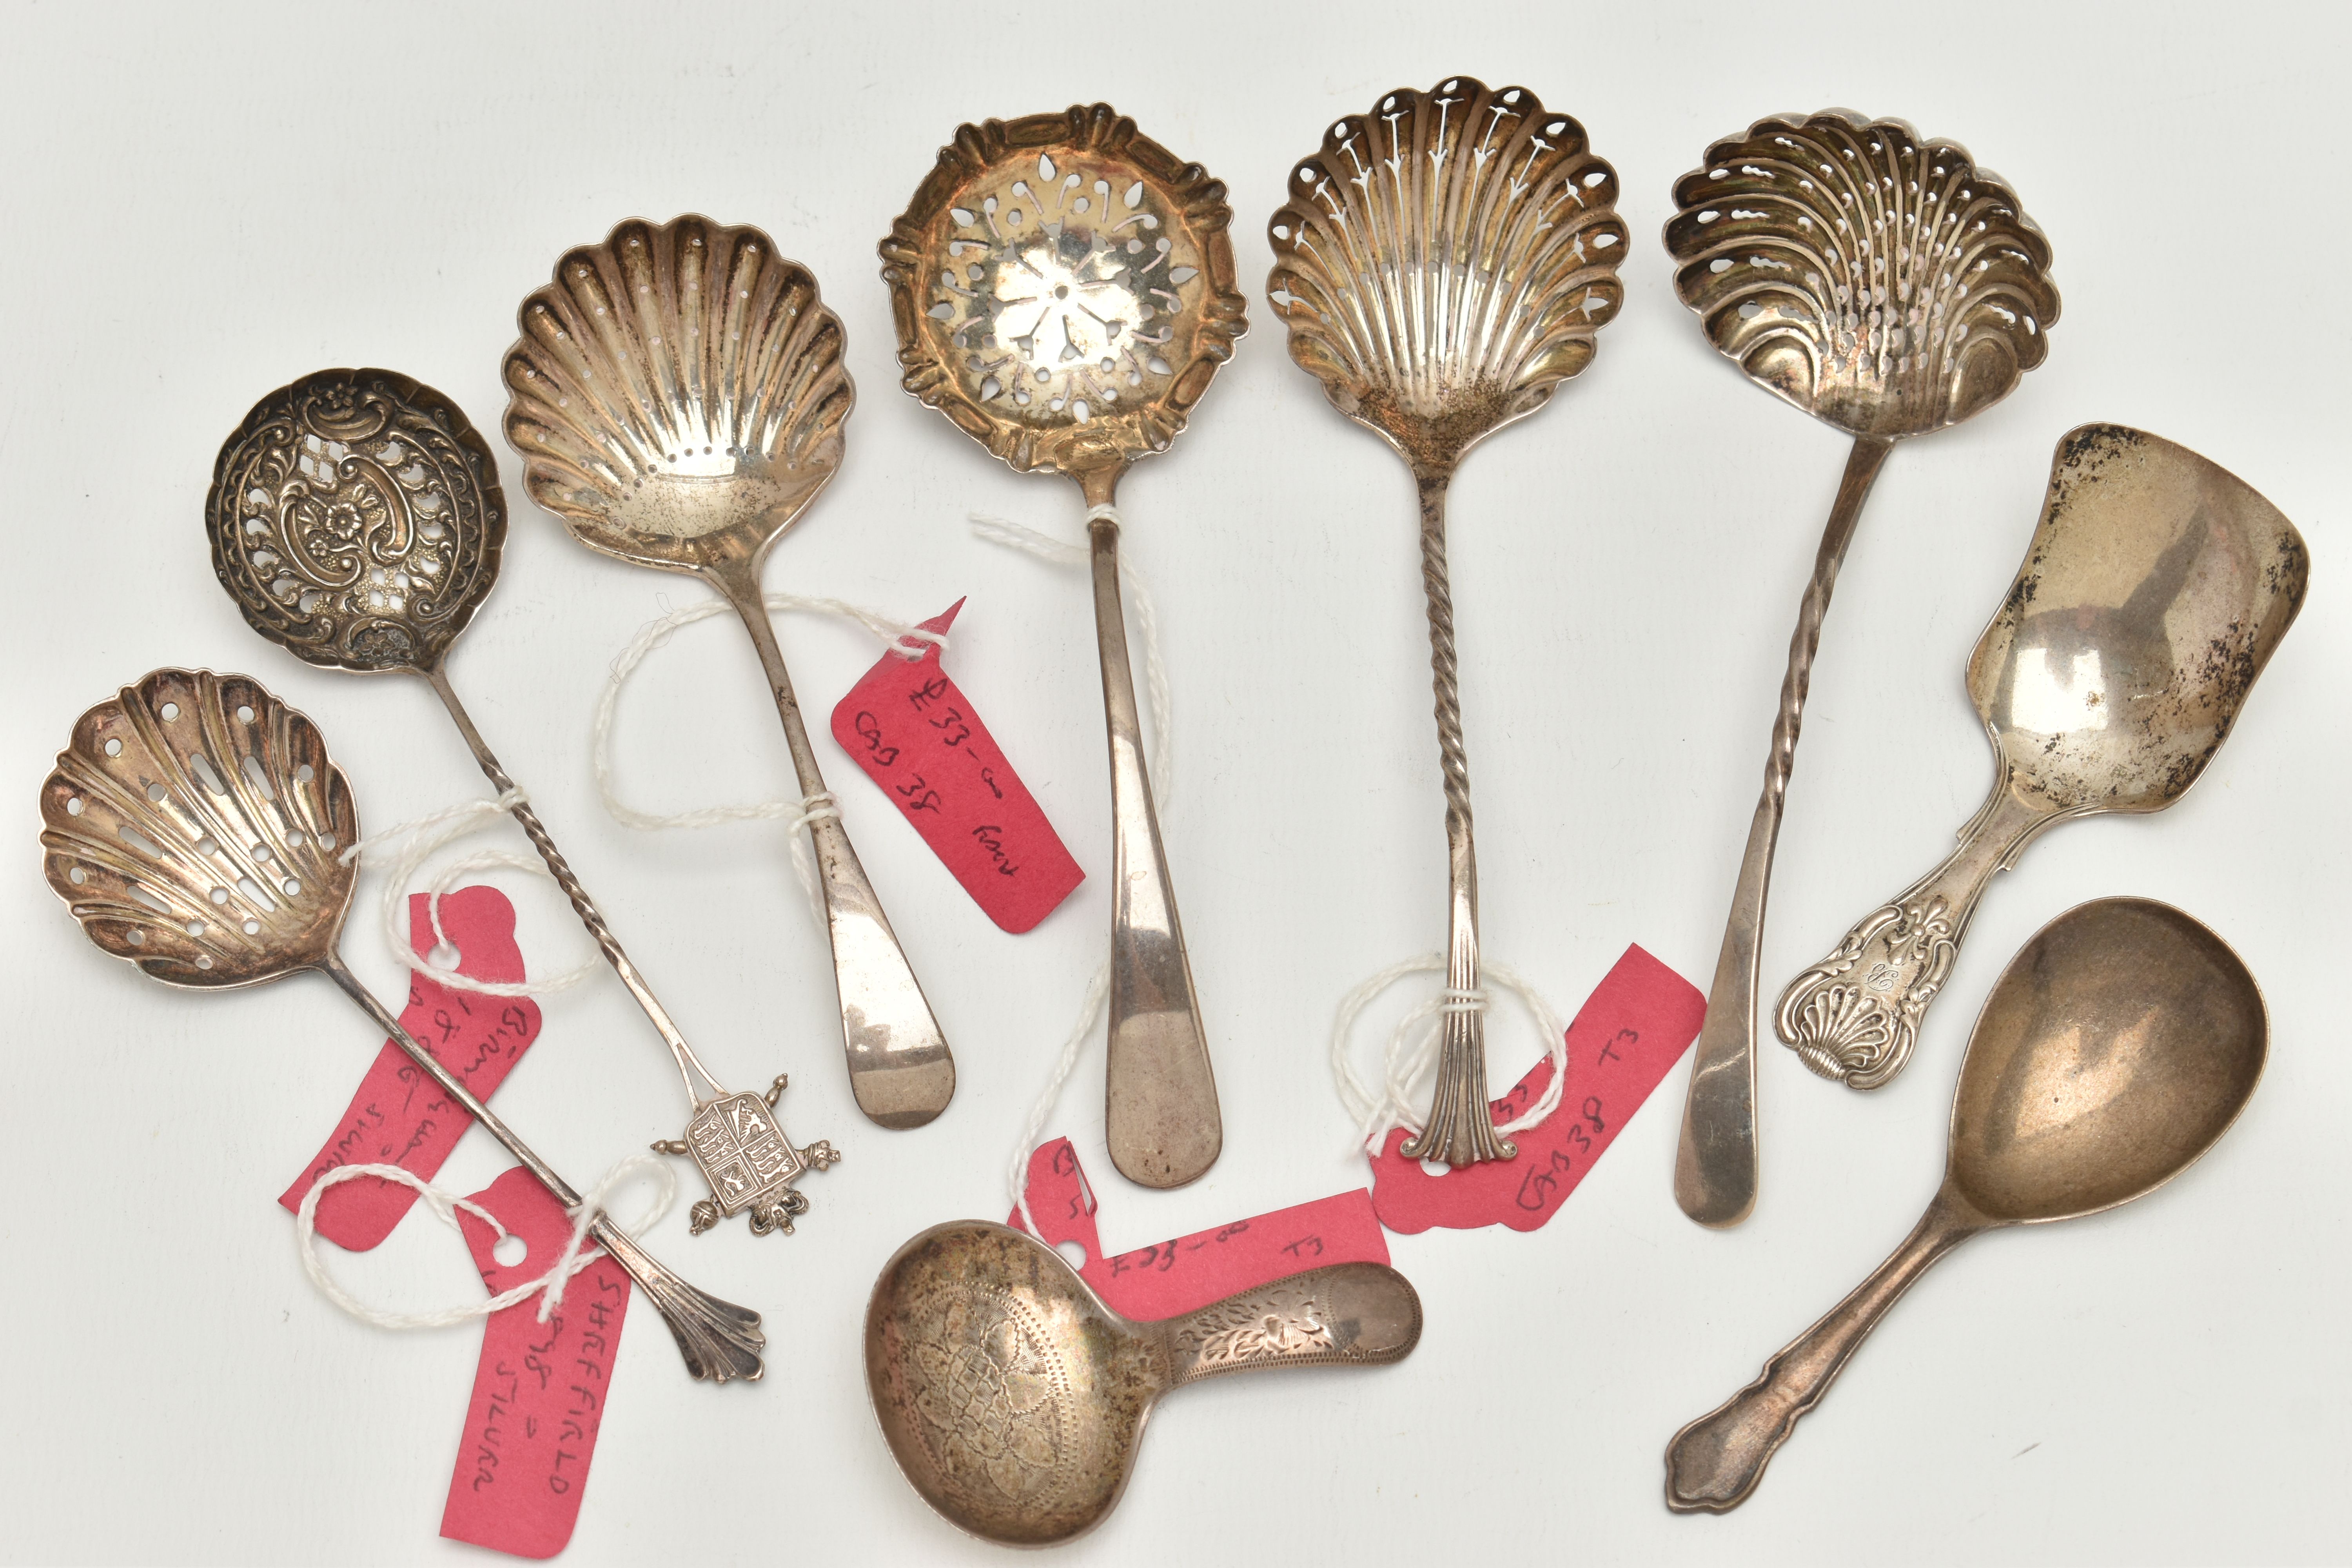 THREE SILVER CADDY SPOONS AND SIX SIFTER SPOONS, to include a 'George Unite' caddy spoon, hallmarked